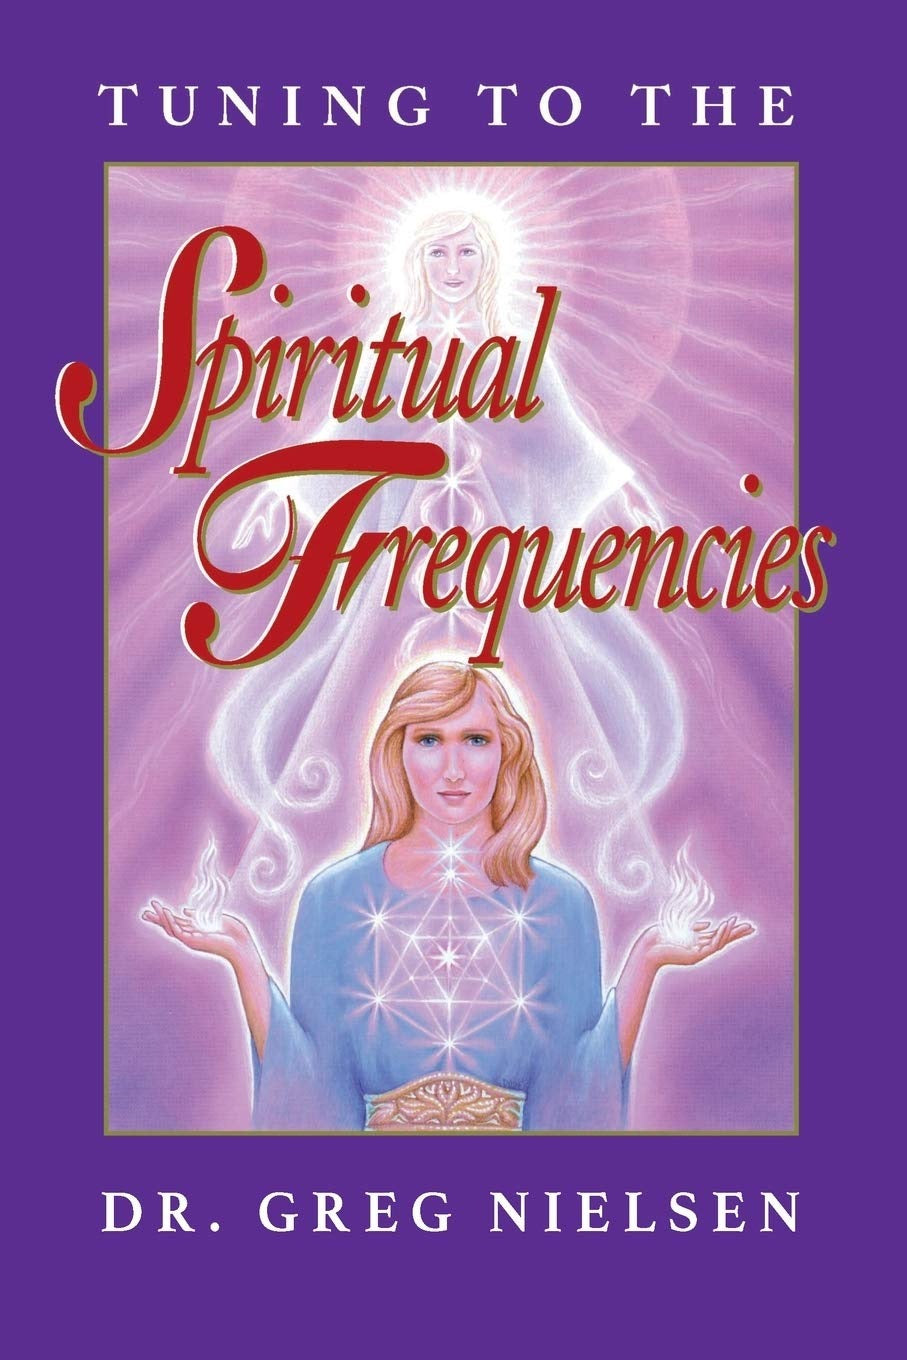 Tuning to the spiritual frequencies: 0961991712